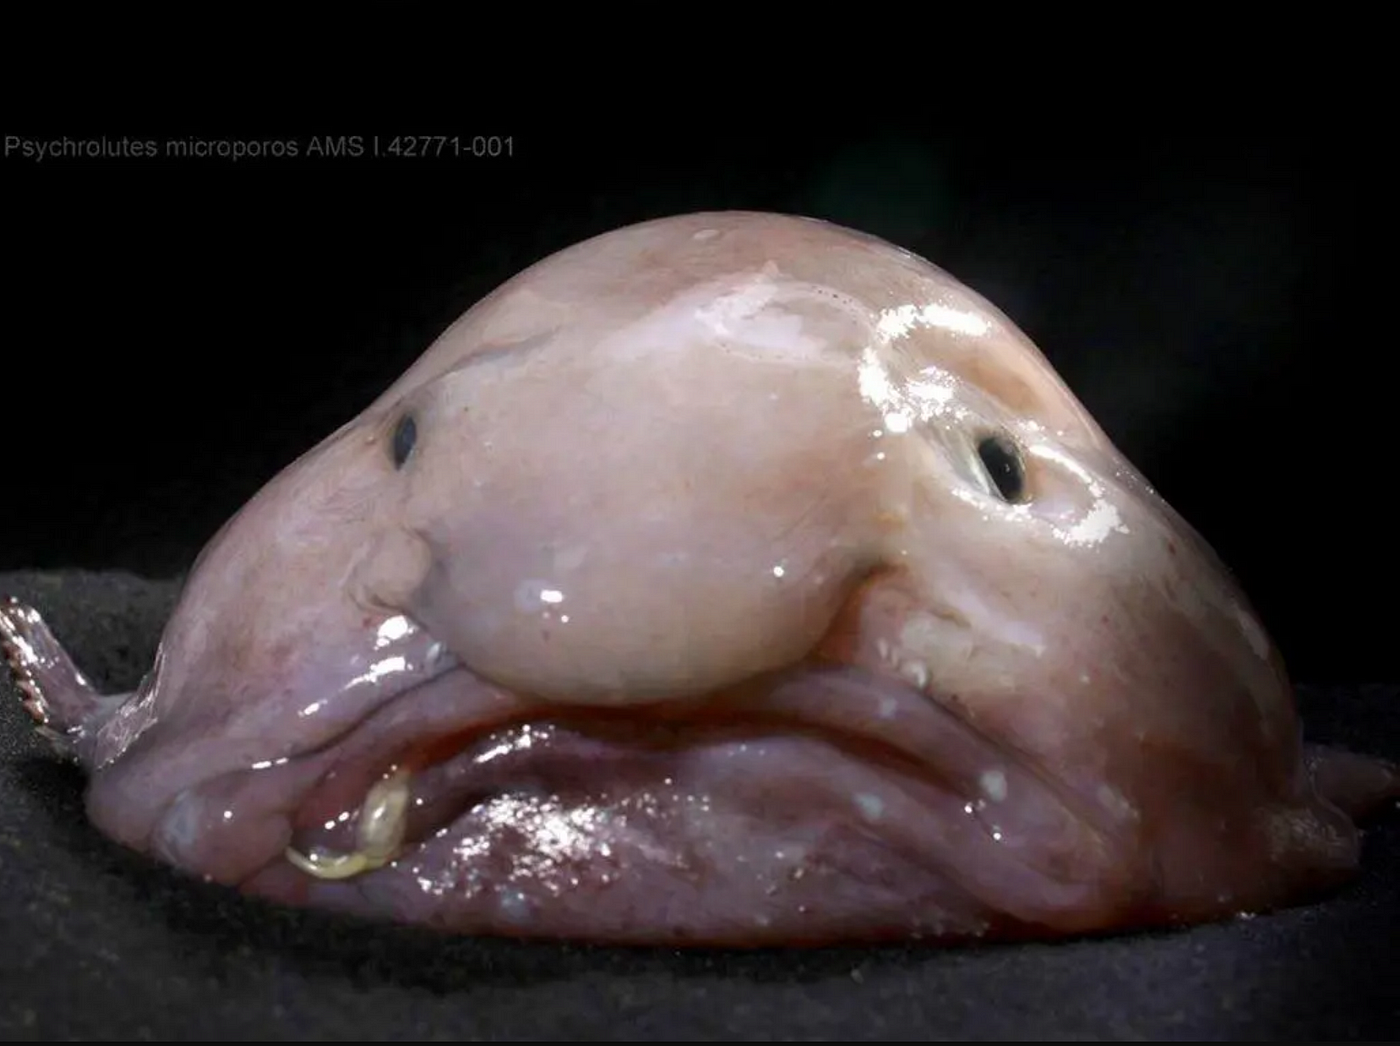 What is a blobfish?